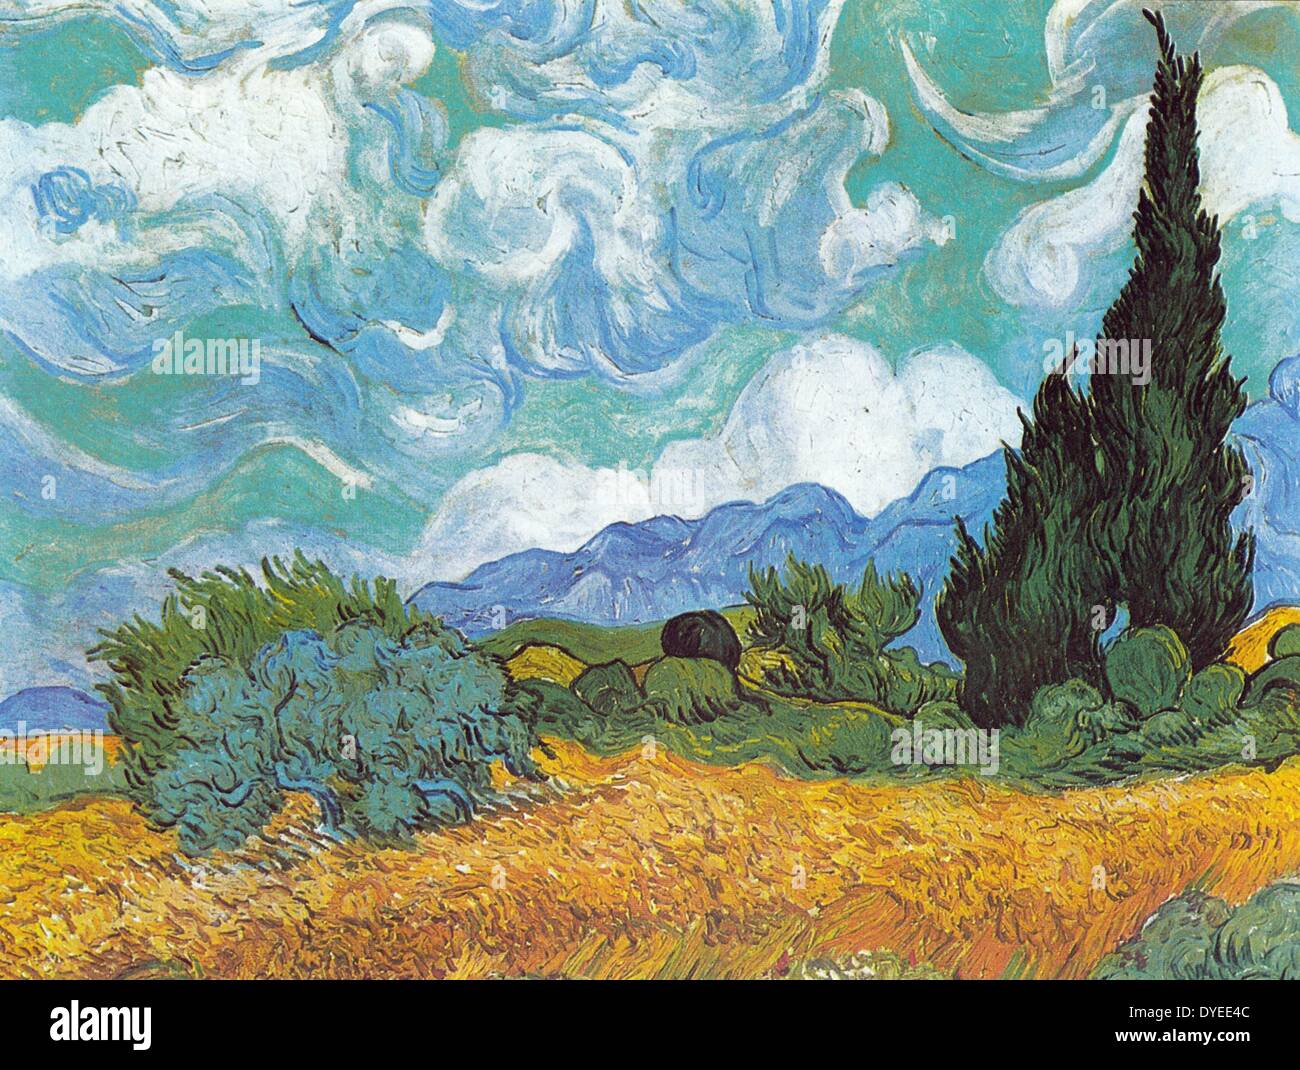 Vincent van Gogh's Wheatfield with Cypresses 1889 A.D. Stock Photo